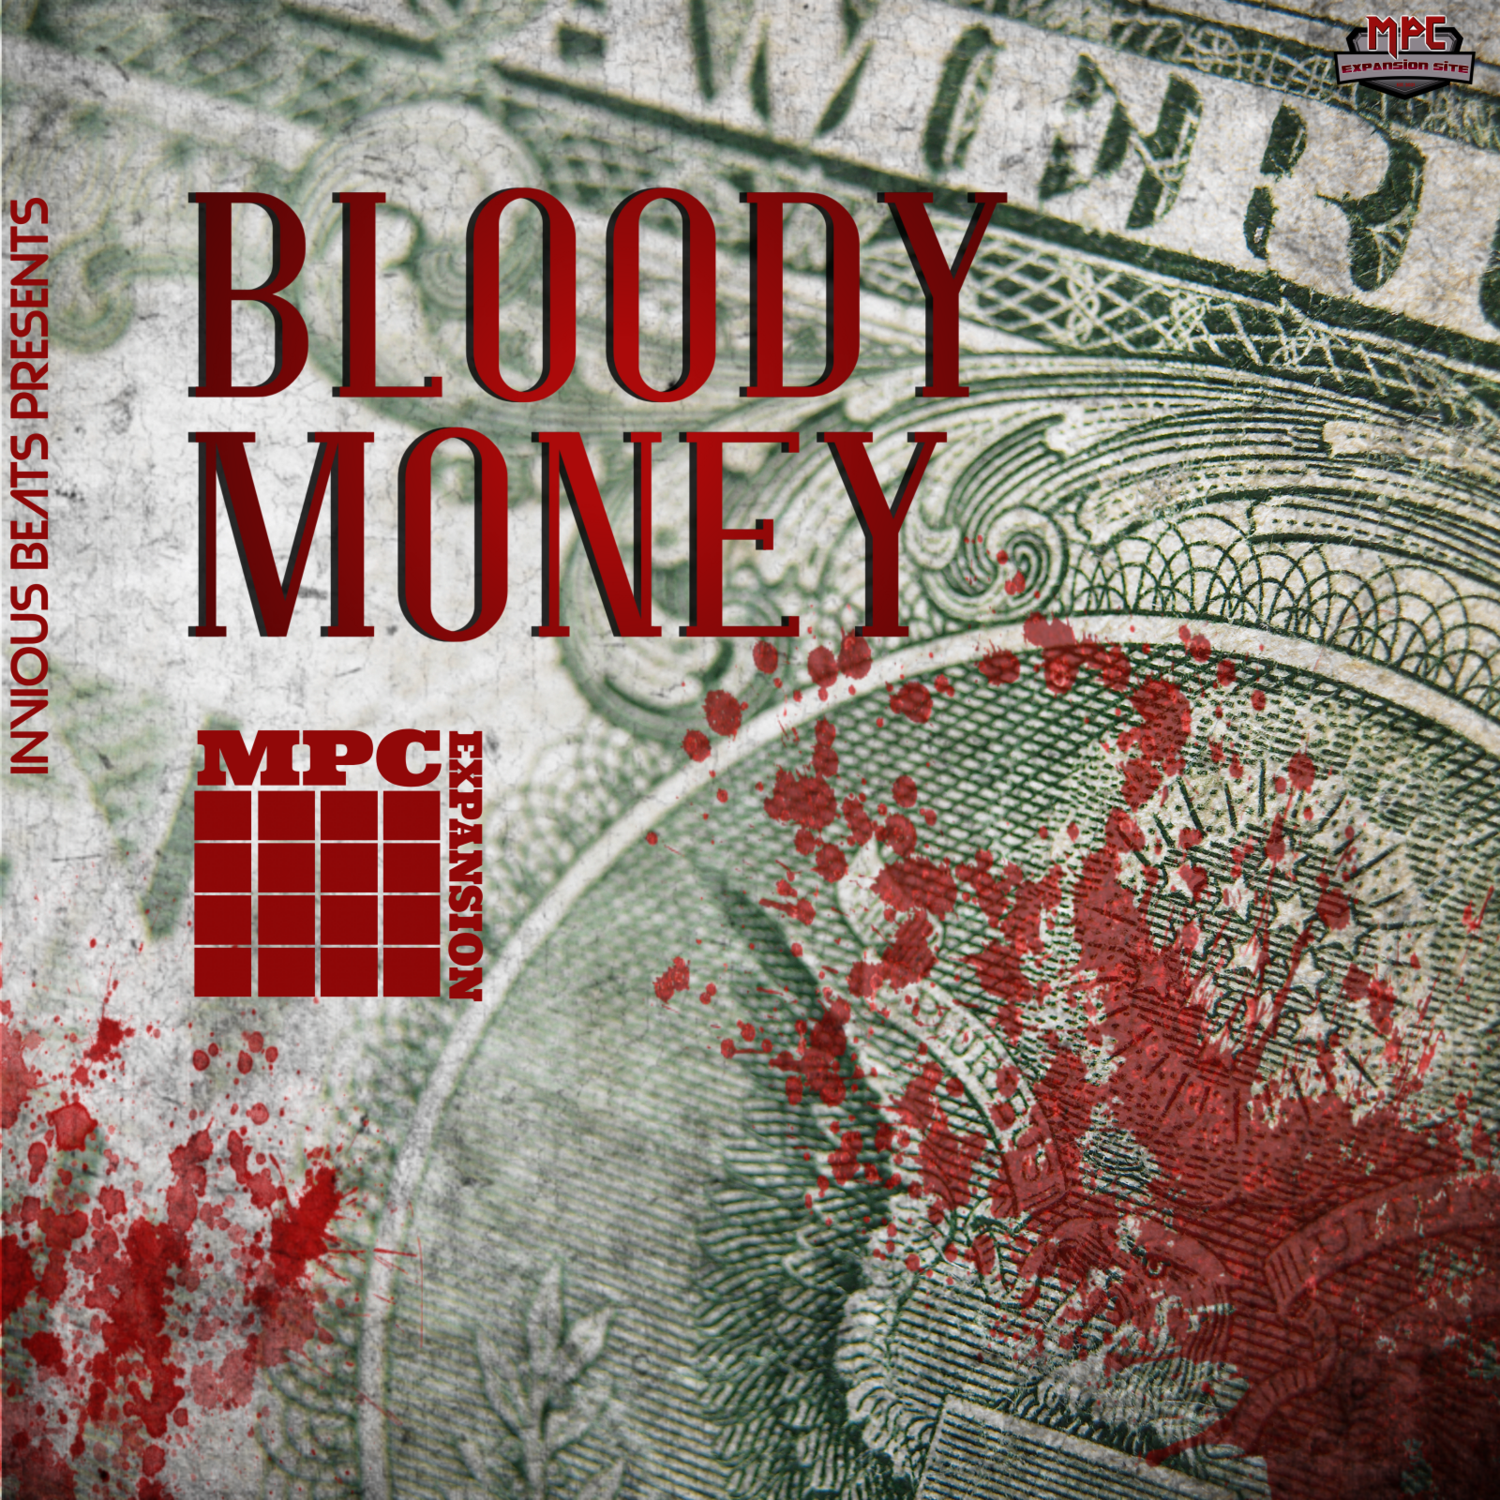 MPC EXPANSION 'BLOOD MONEY' by INVIOUS